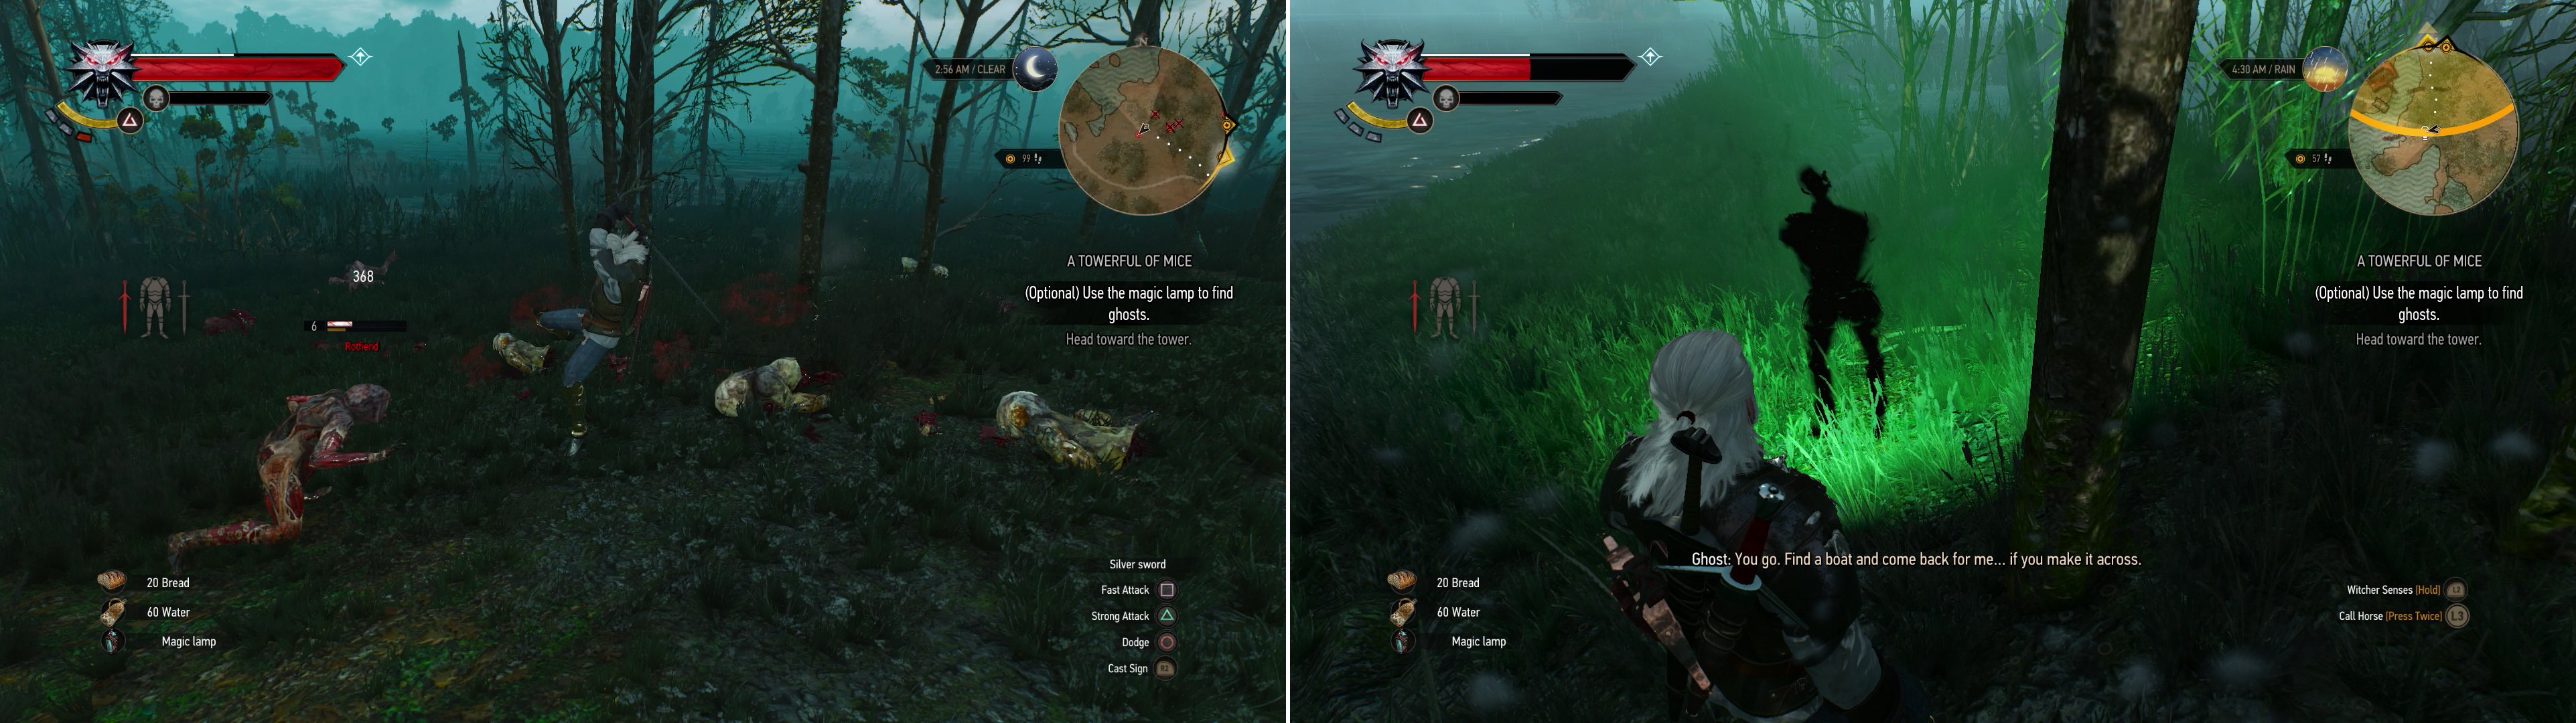 Sow Comorama Blot The Witcher 3 Magic Lamp Puzzle: The Correct Order - Velen - Walkthrough |  The Witcher 3: Wild Hunt | Gamer Guides®